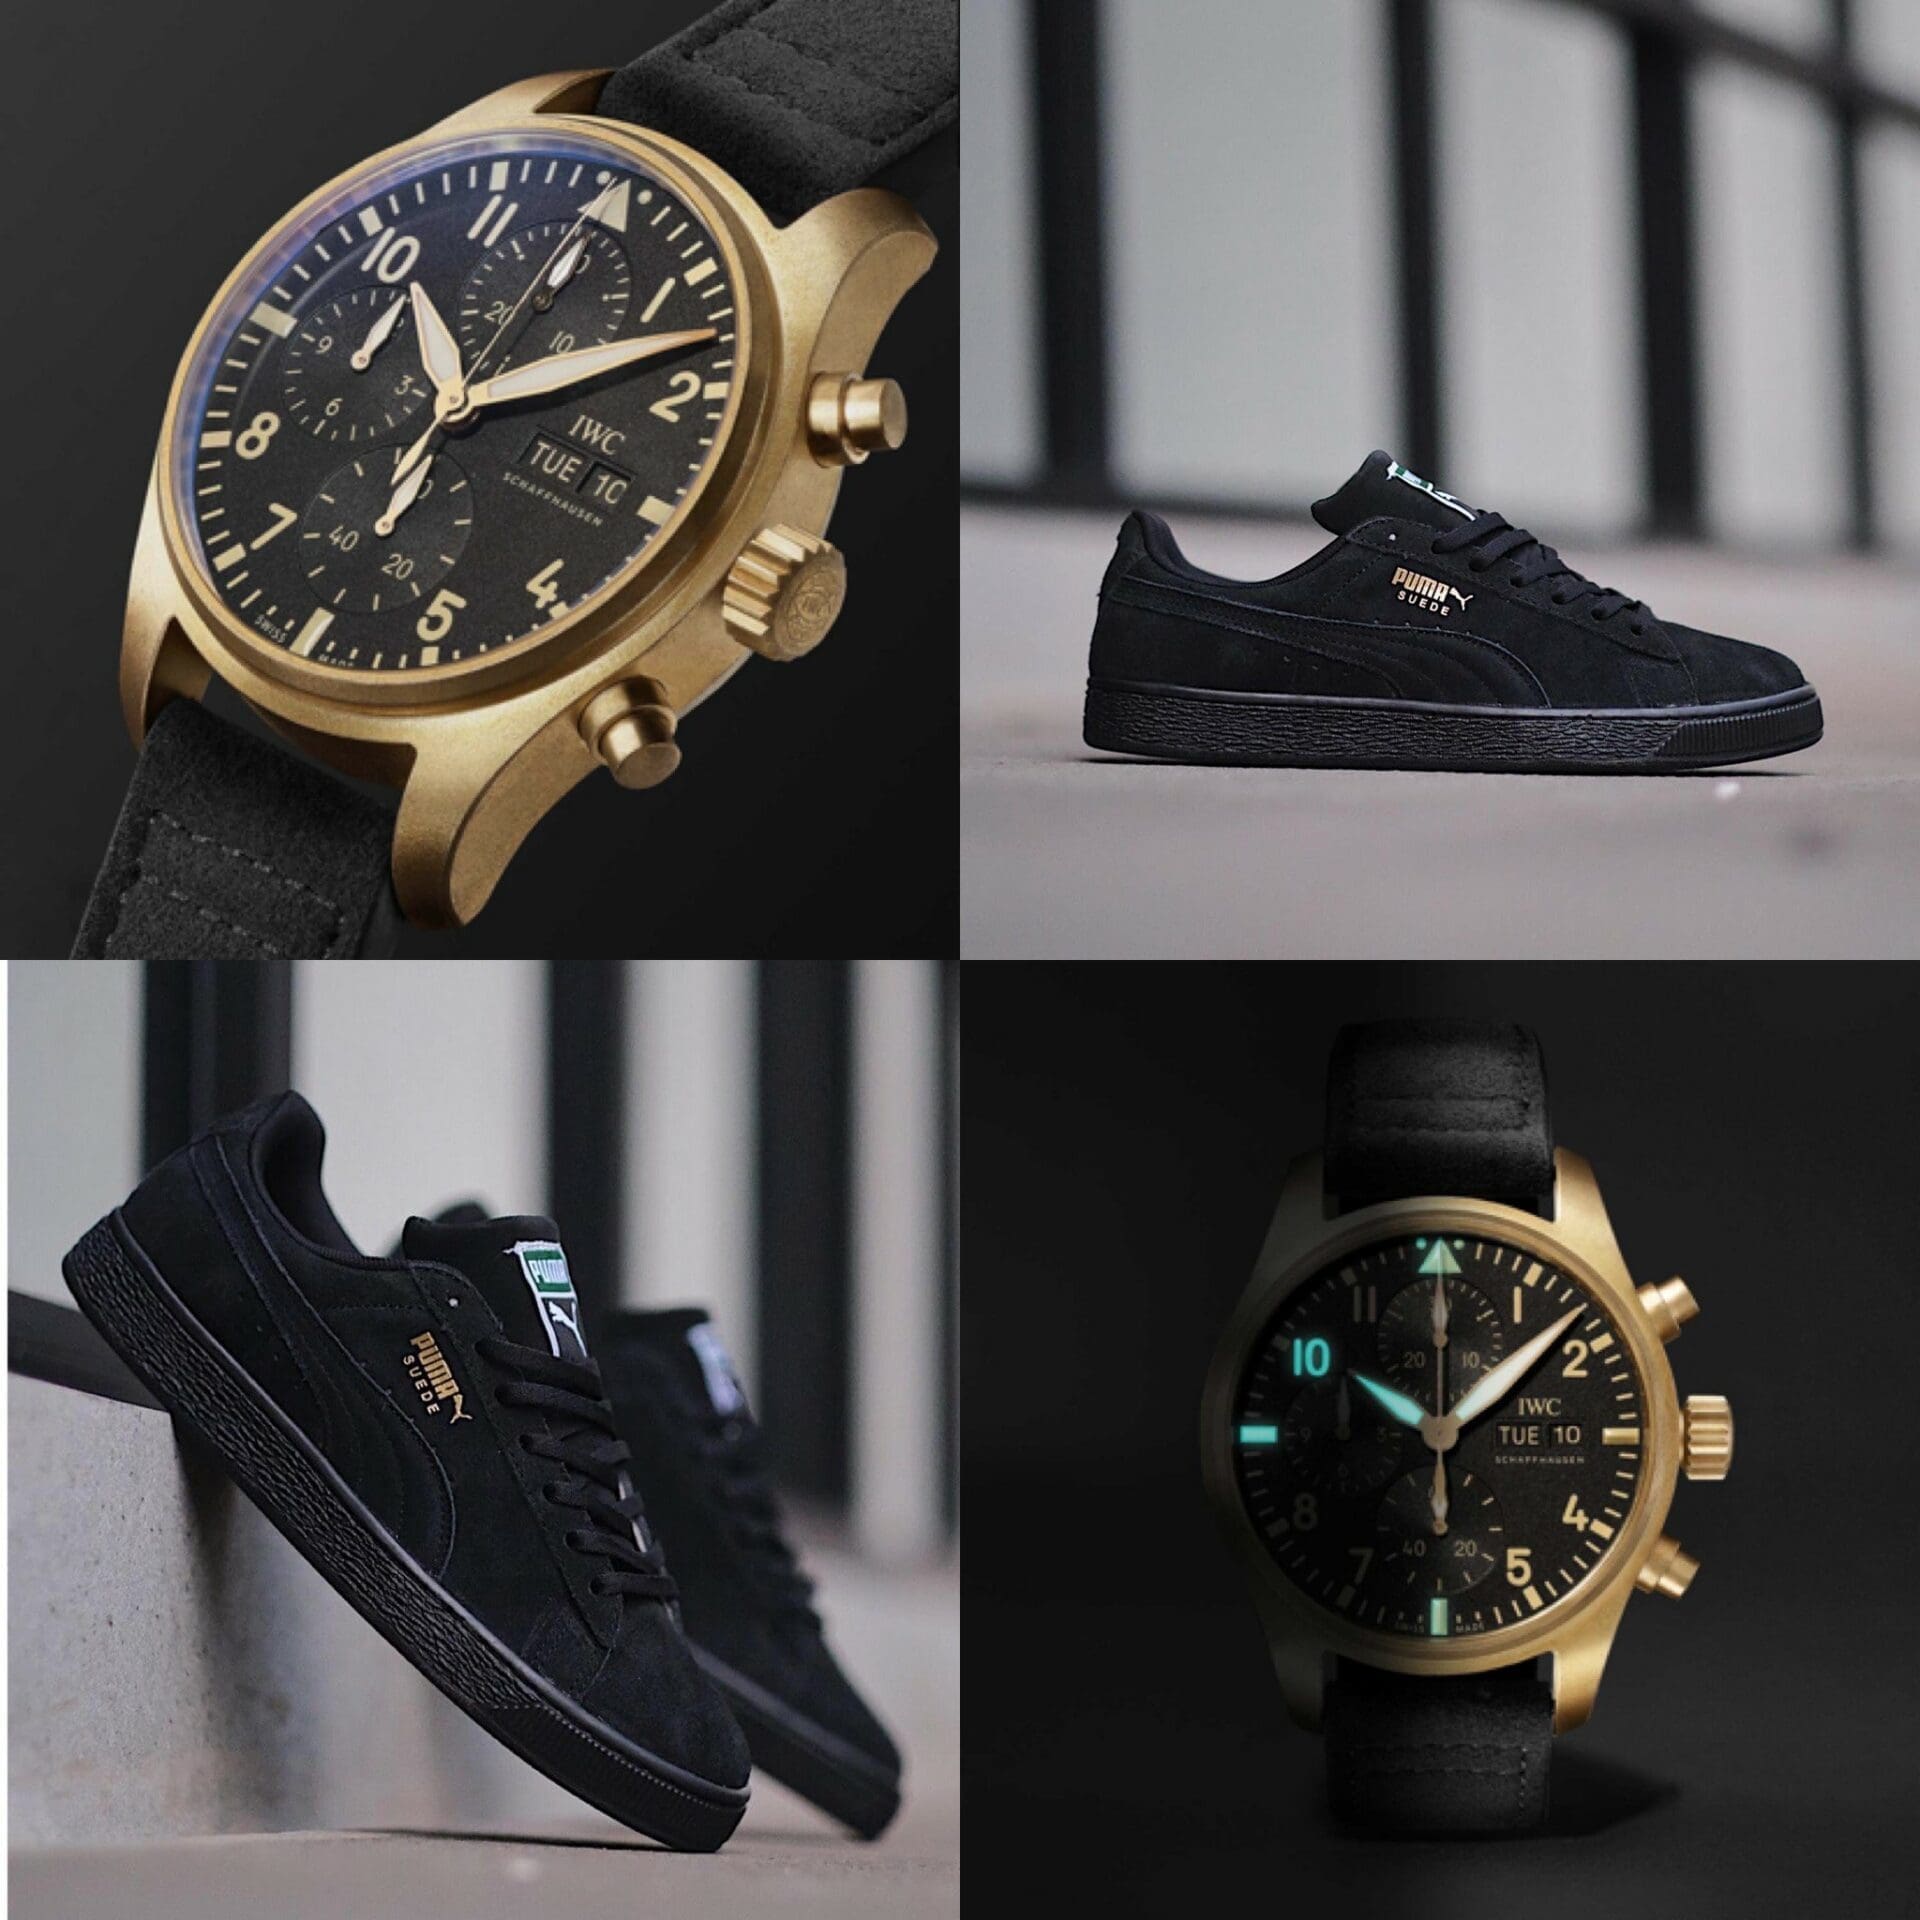 #Kixntix: A limited edition IWC Pilot’s Watch 41 from Mr Porter meets Puma’s street-tough suede